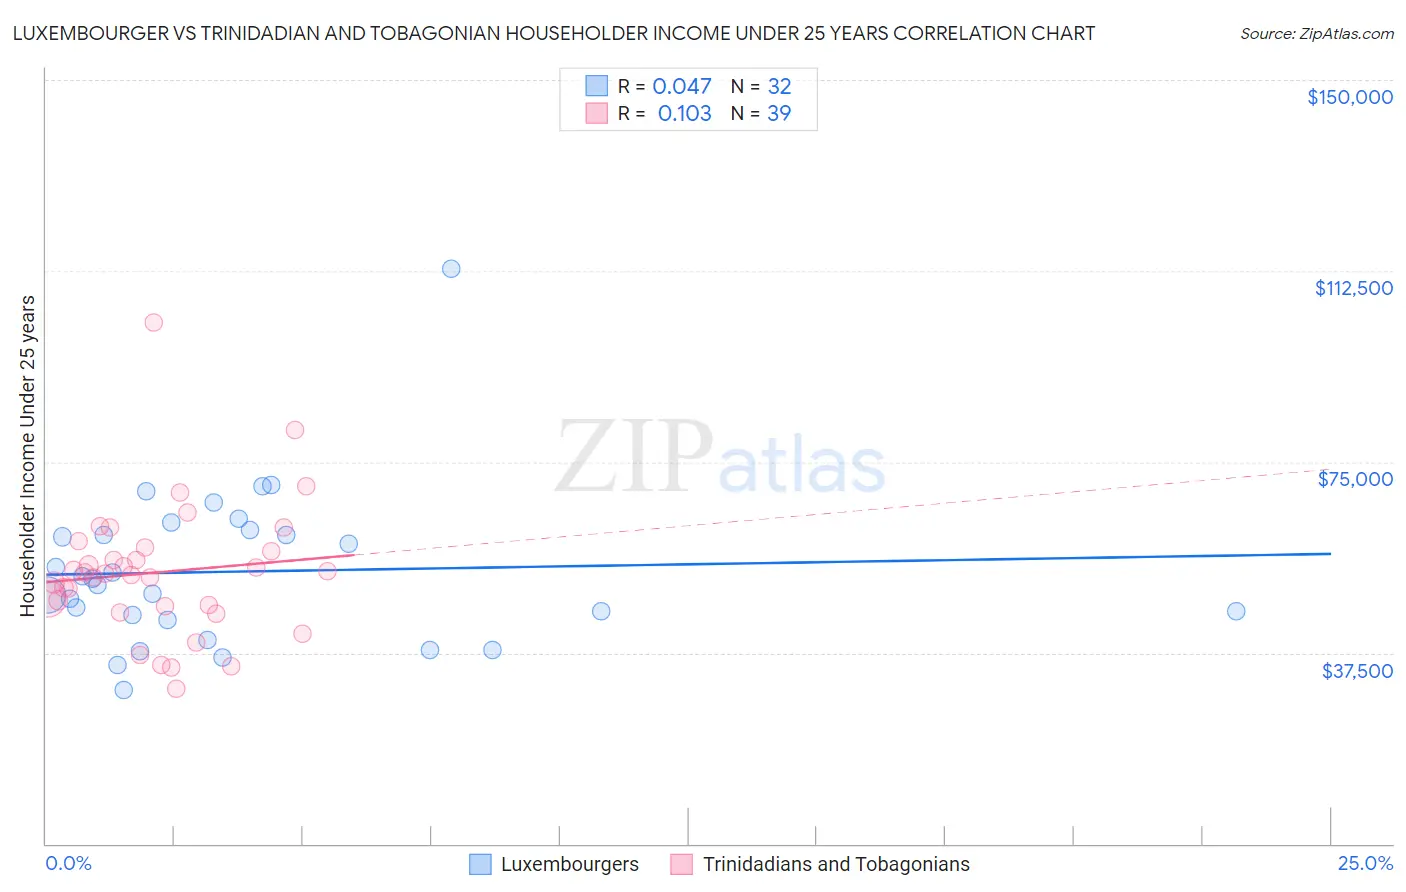 Luxembourger vs Trinidadian and Tobagonian Householder Income Under 25 years